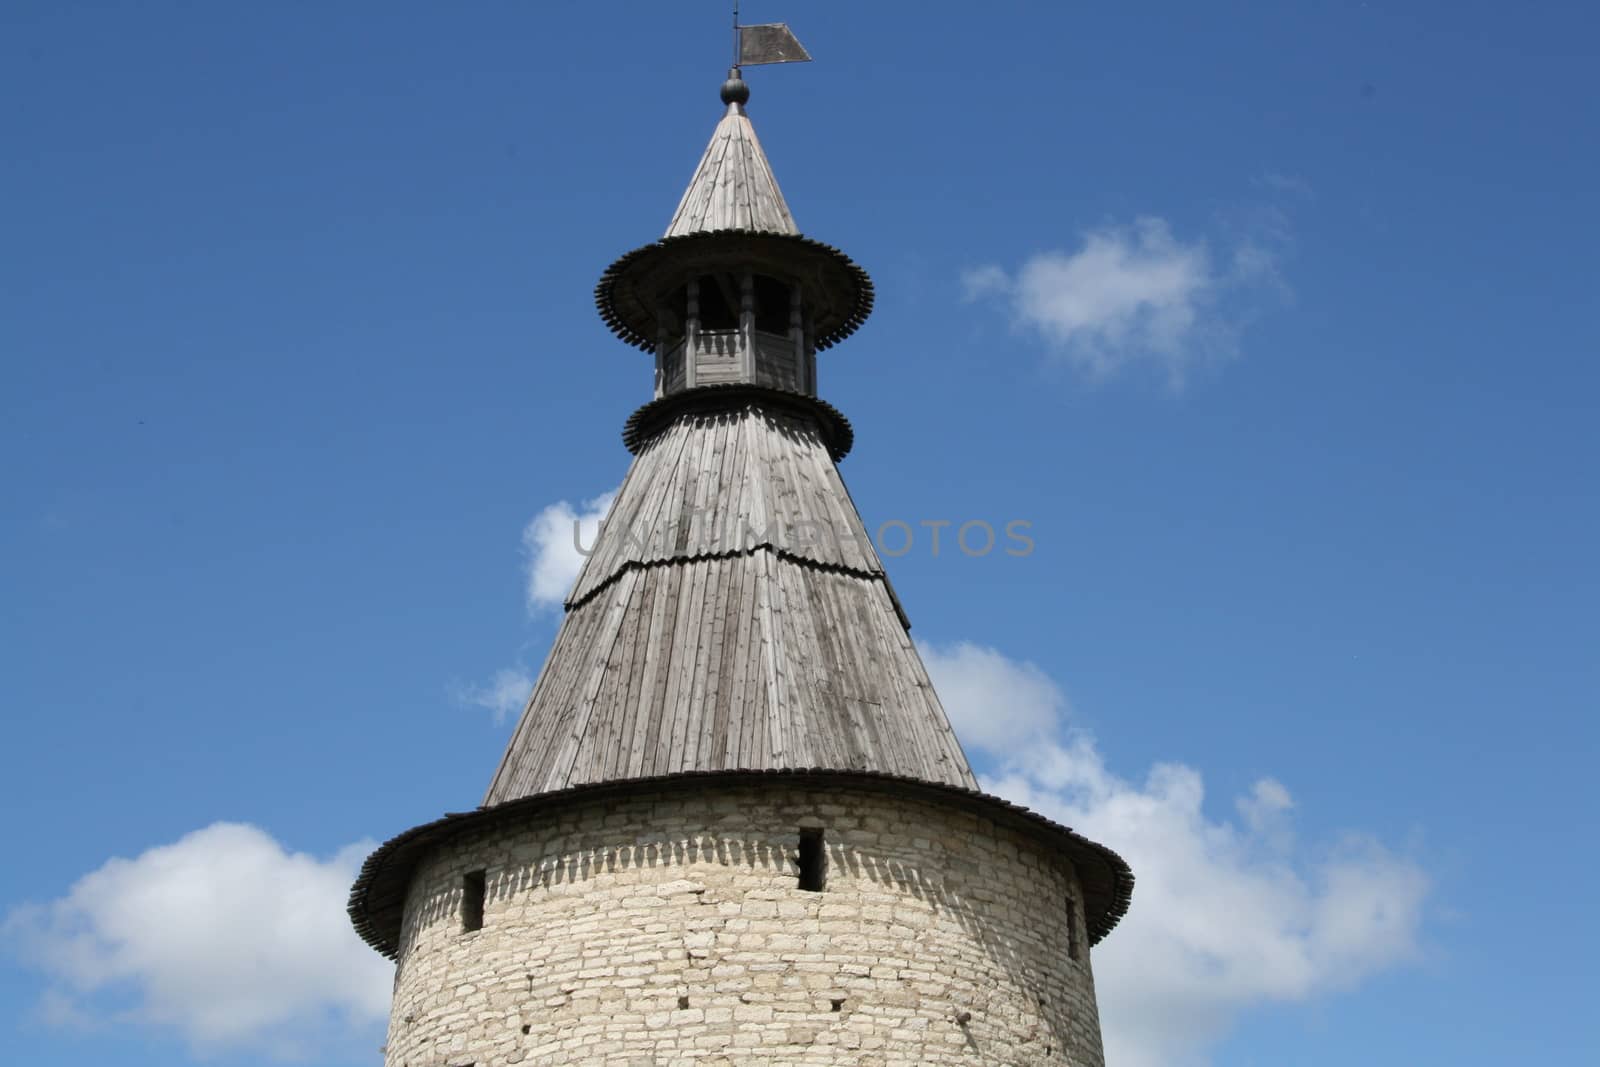 Classical Russian ancient architecture. Stone tower of old fortress. Kremlin of Pskov, Russia